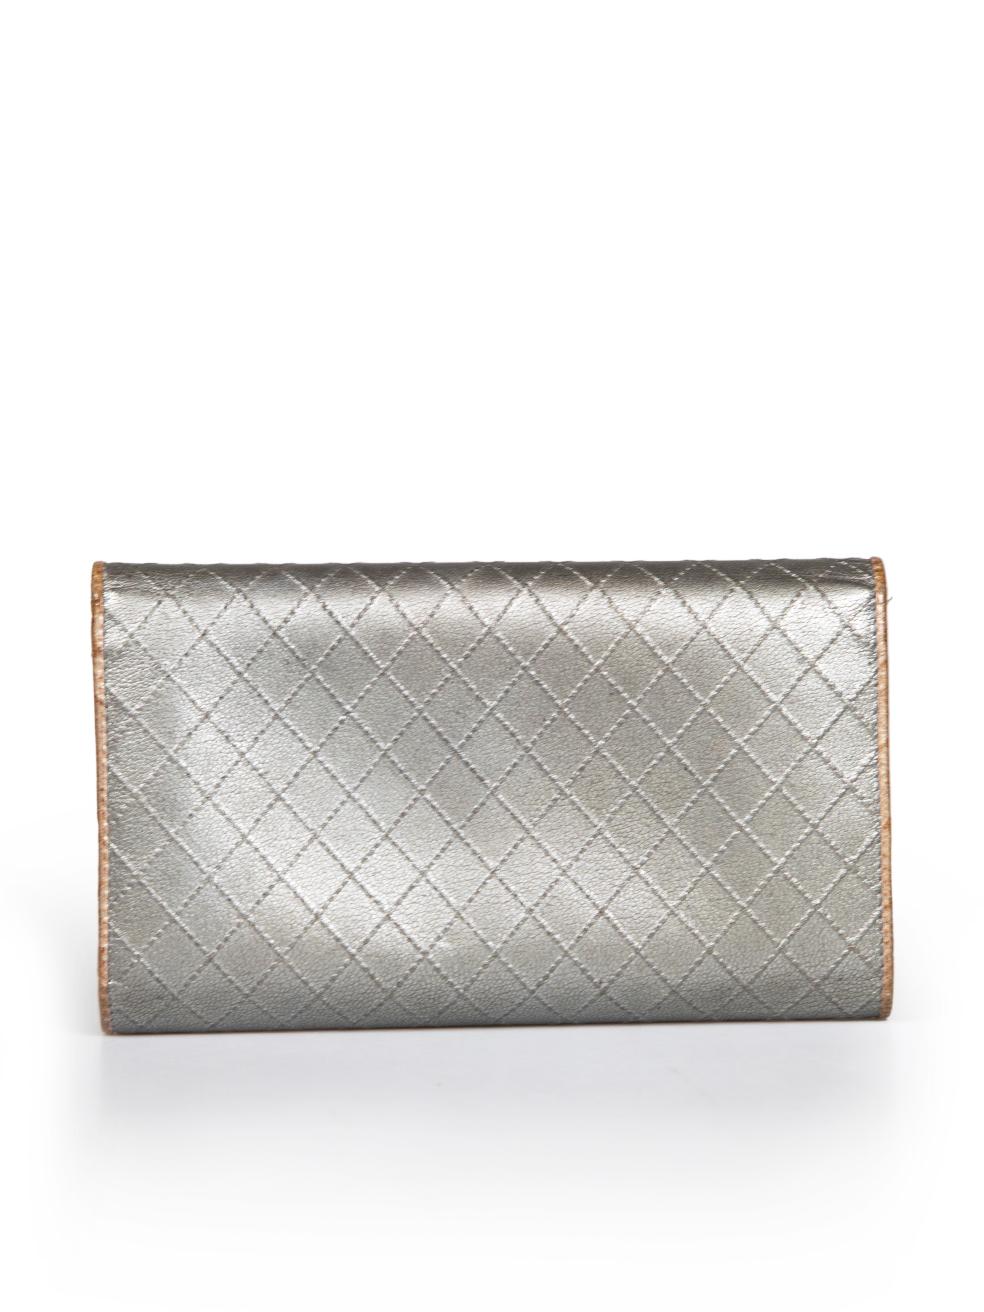 Chanel 2006-08 Silver Calfskin CC Flap Diamond Stitch Wallet In Good Condition For Sale In London, GB